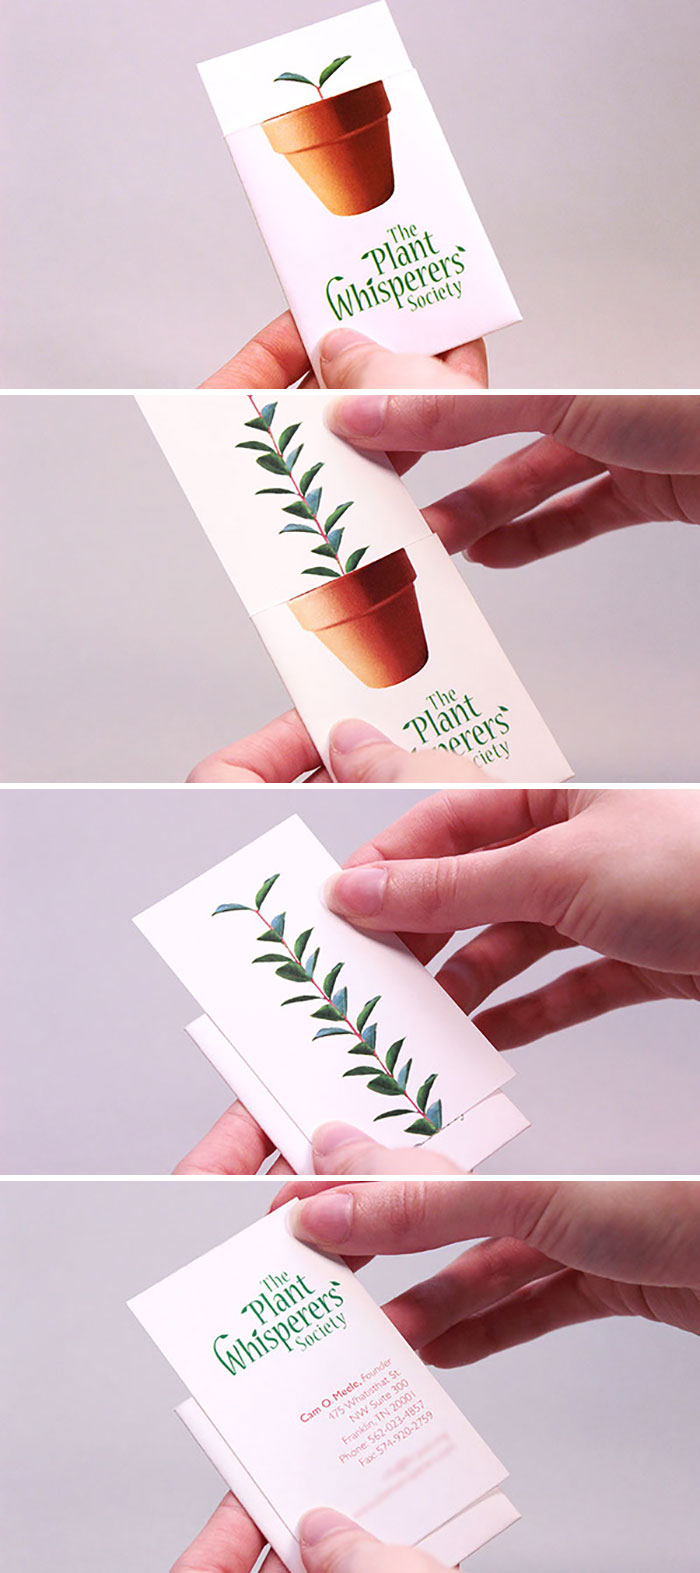 Simple And Unique Business Card Design For The Plant Whisperers Society